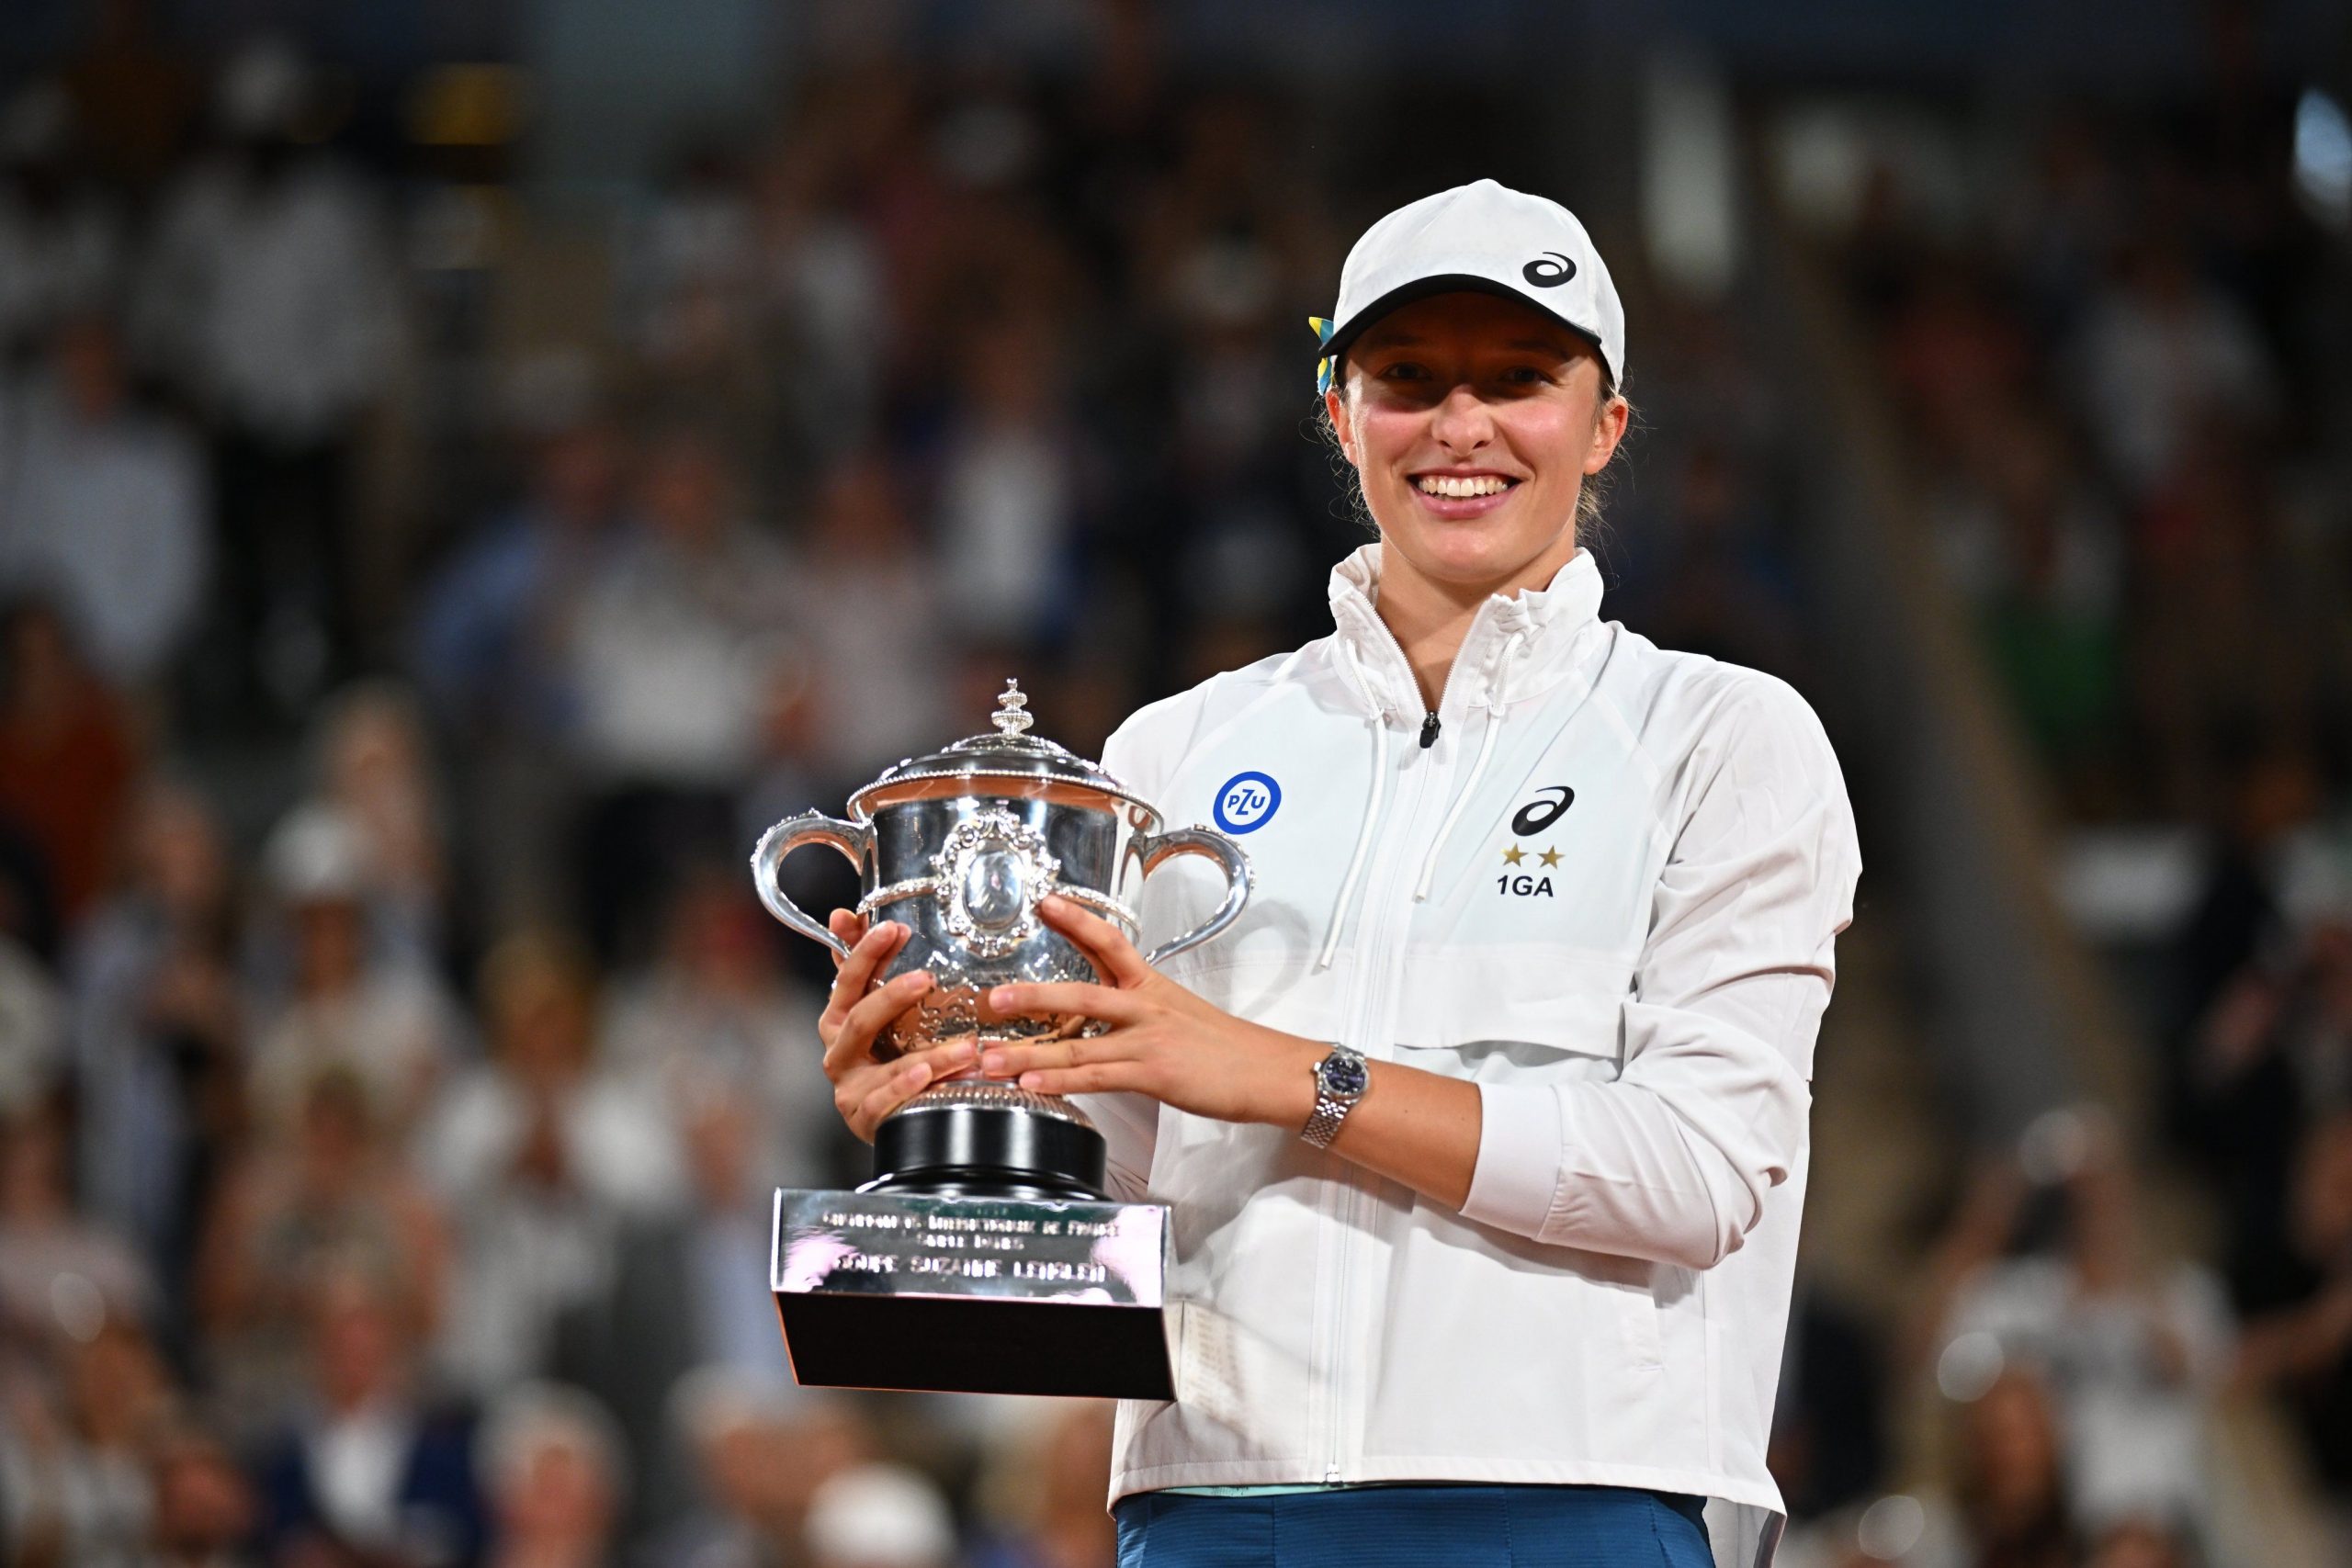 ‘Thank you tennis’: Iga Swiatek pens note after French Open win